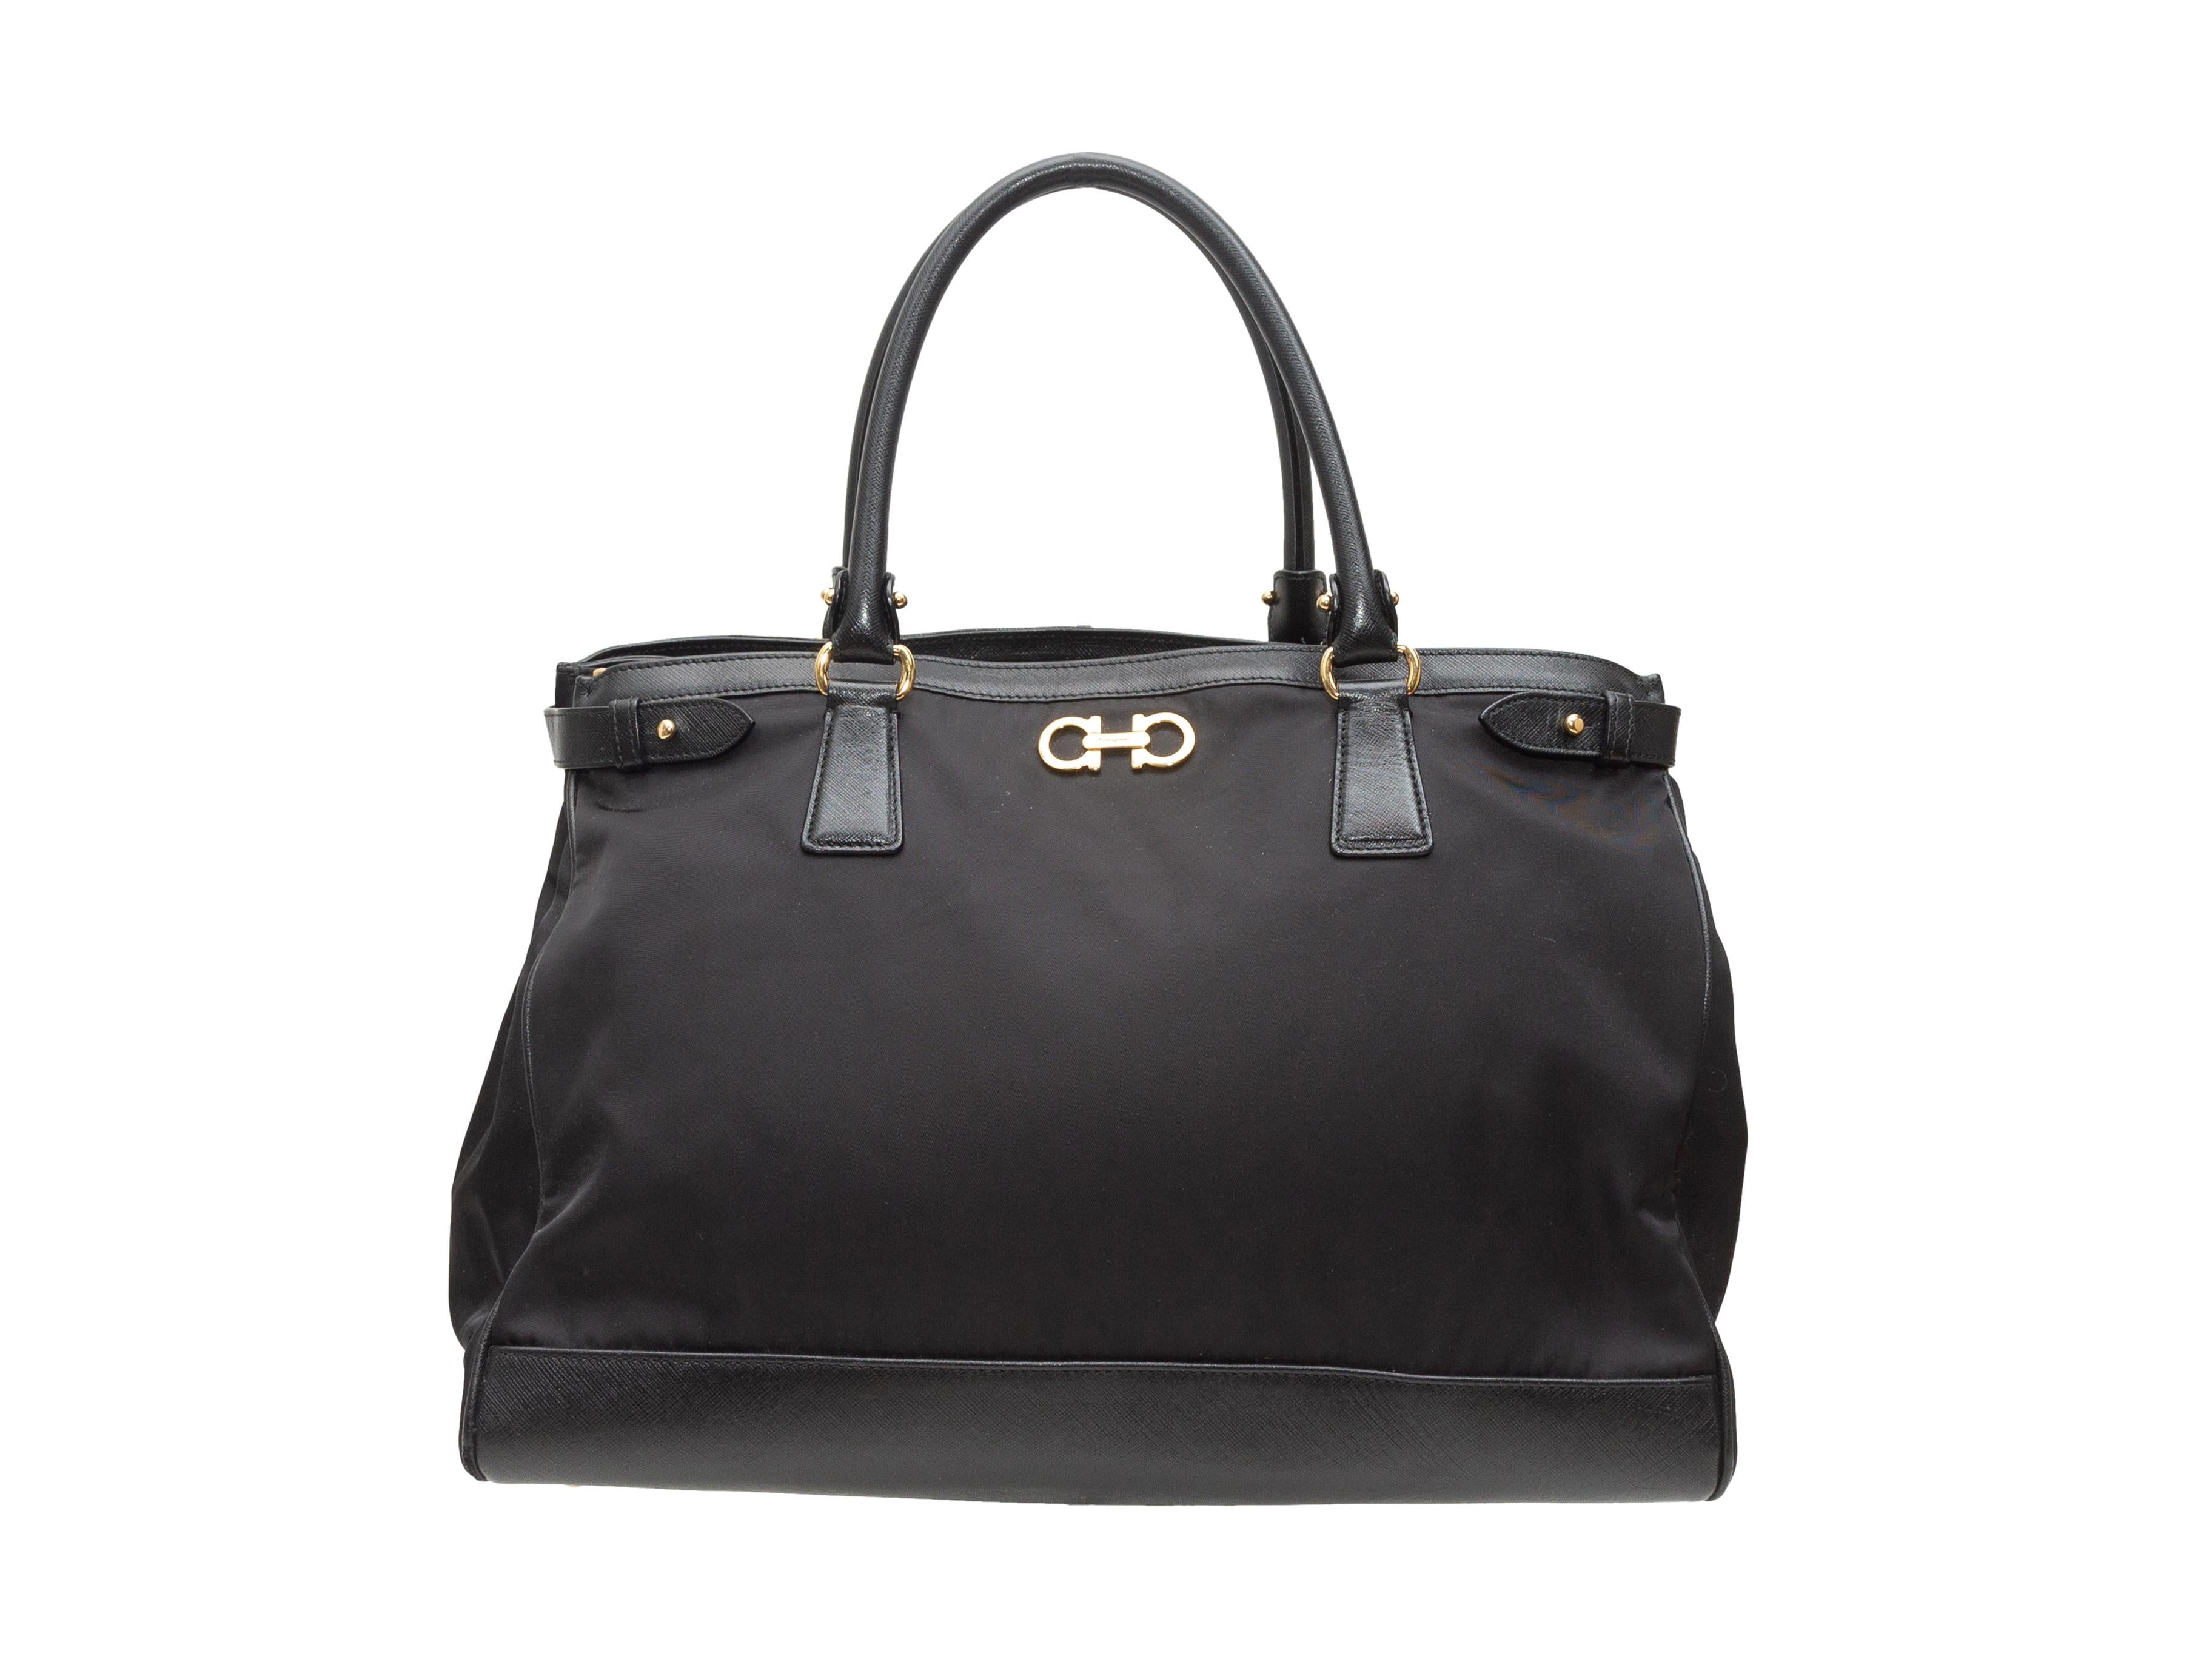 Product details: Black Salvatore Ferragamo Nylon & Leather Handbag. This bag features a nylon body, leather trim, gold-tone hardware, dual rolled top handles, an optional flat shoulder strap, and a zip closure at the top. 15